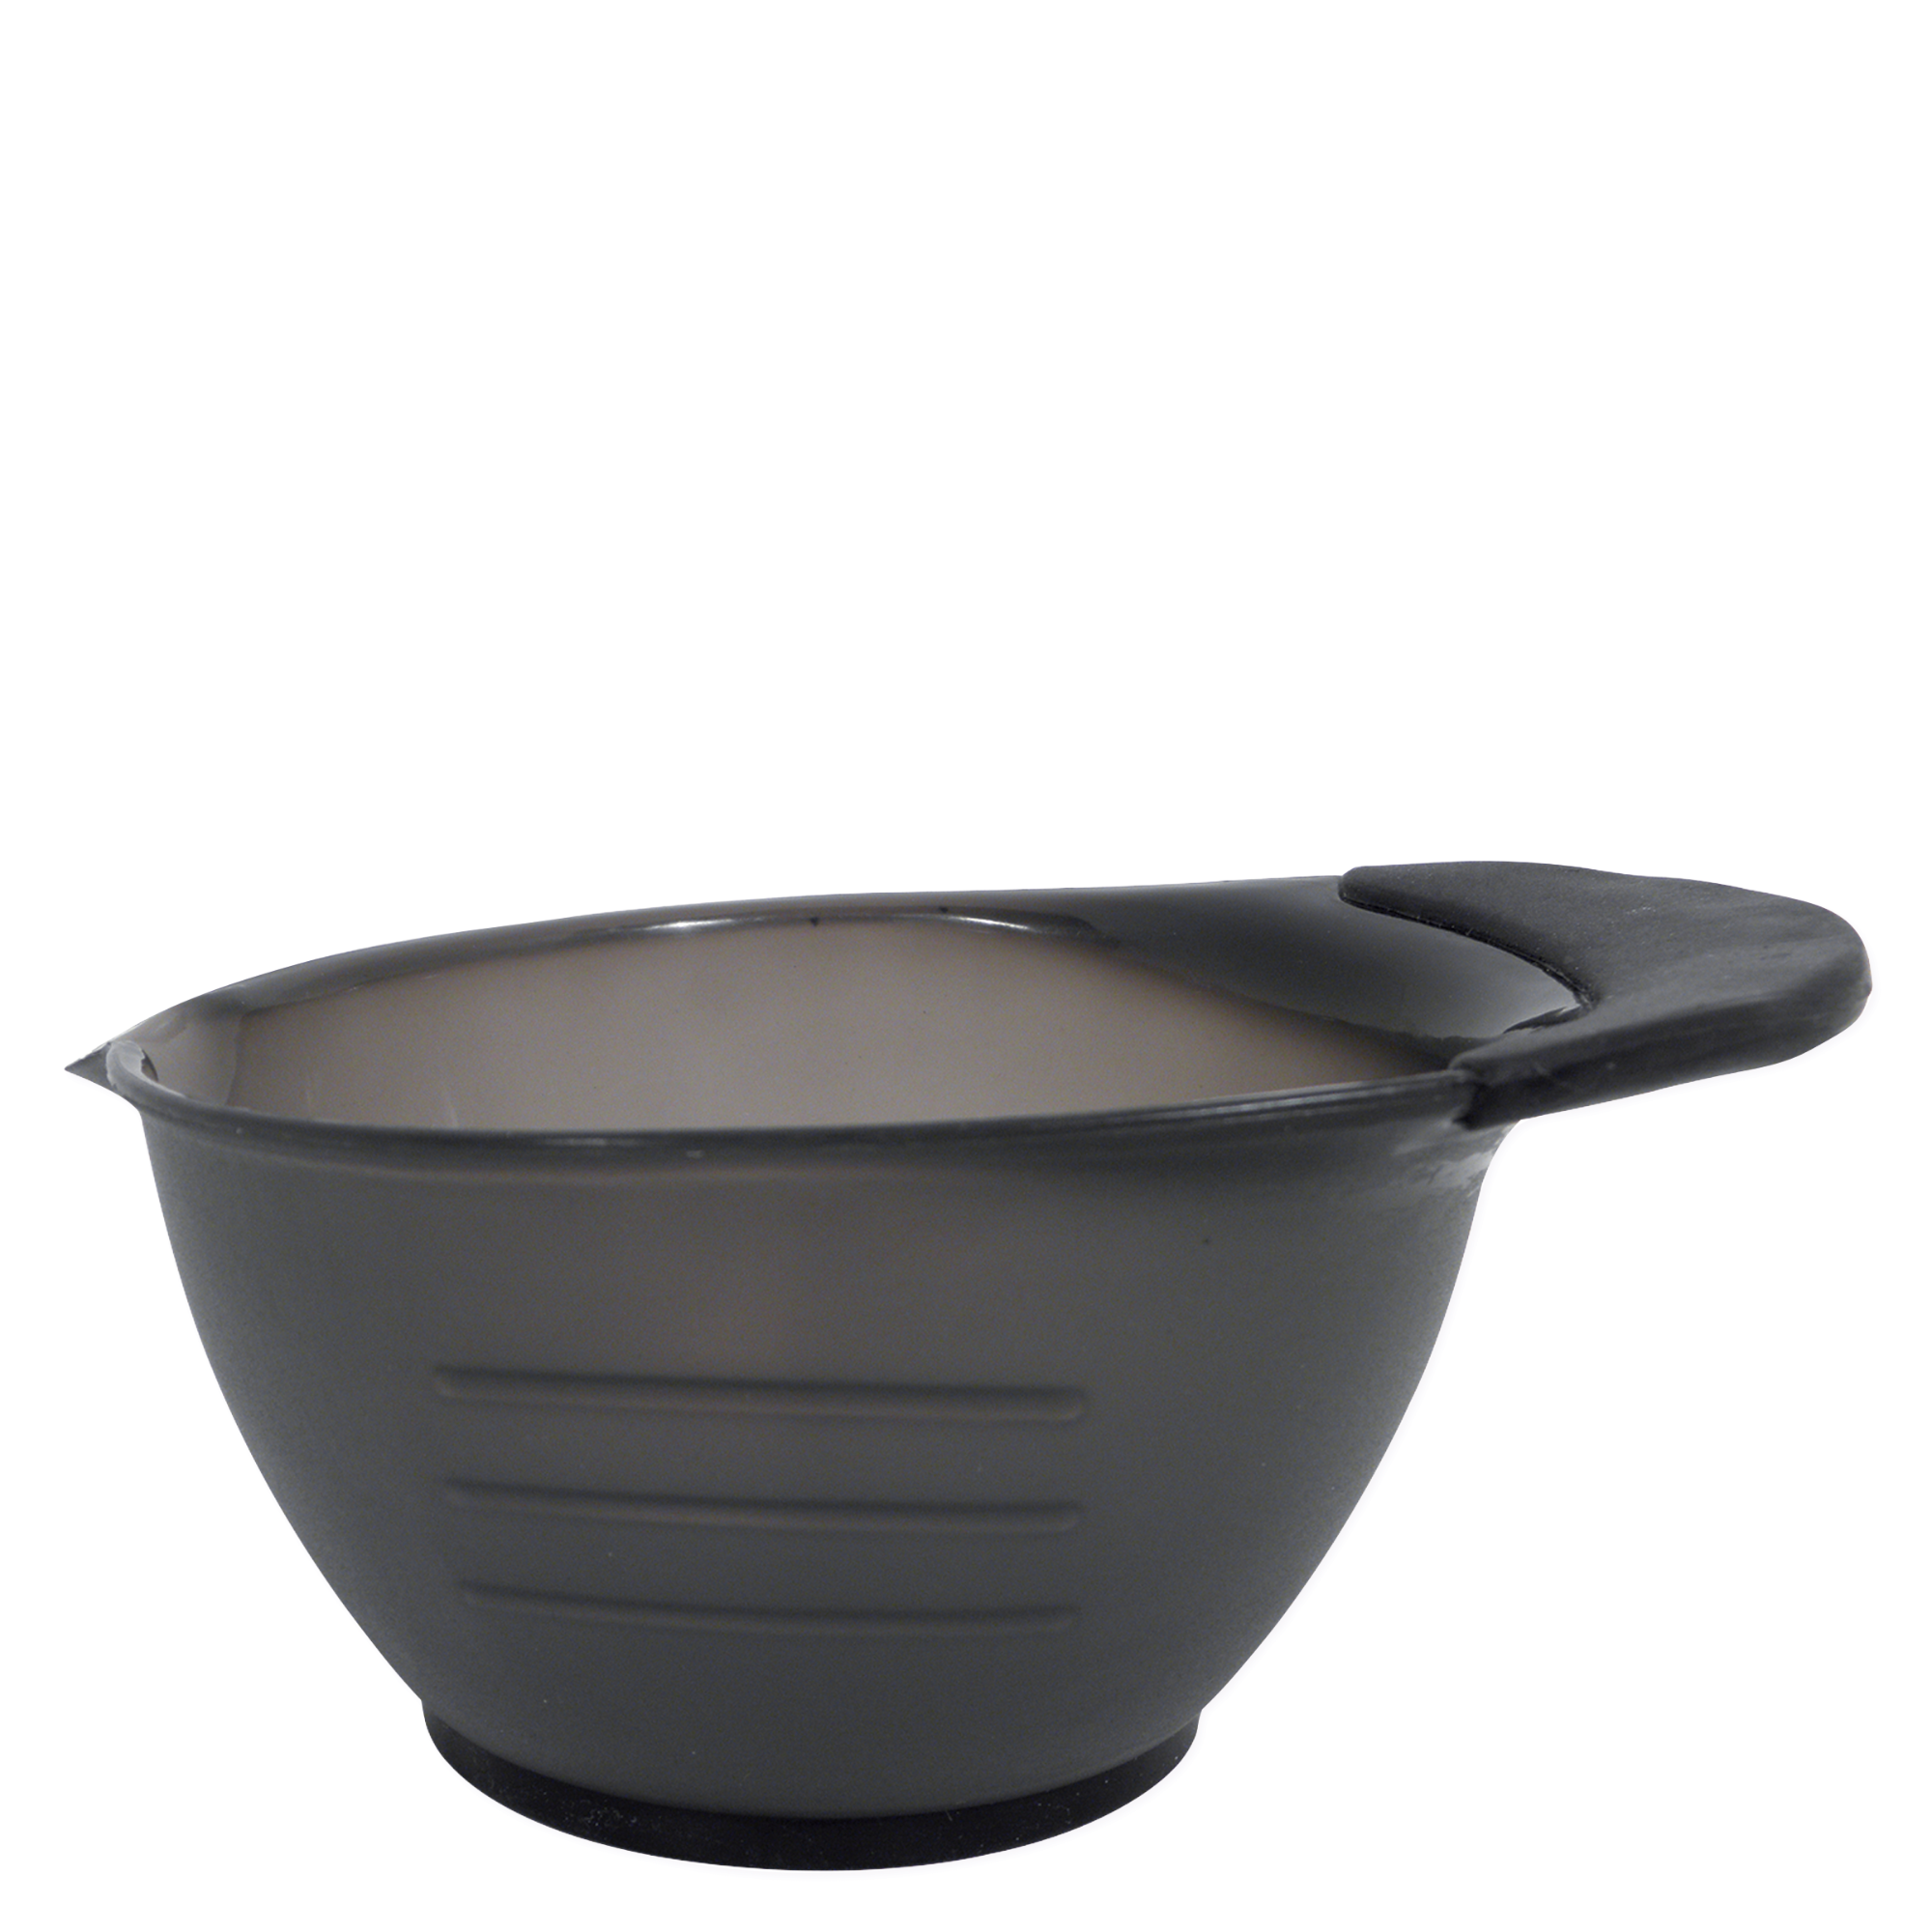 Deluxe Color Bowl with Rubberized Base and Handle